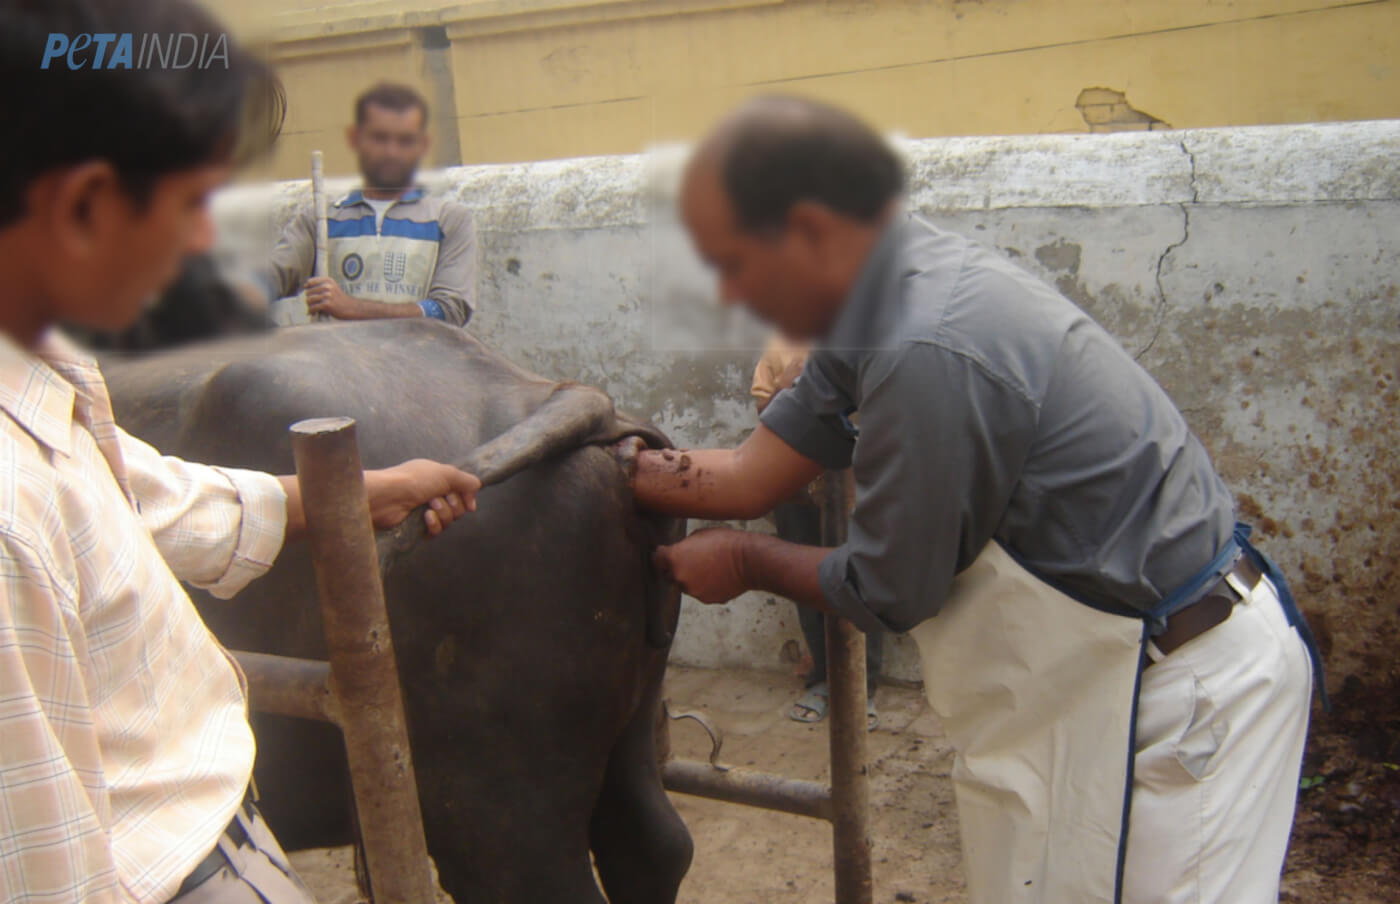 Let's Get Real: Cow and Buffalo Milk Is Non-Vegetarian - Living - PETA India